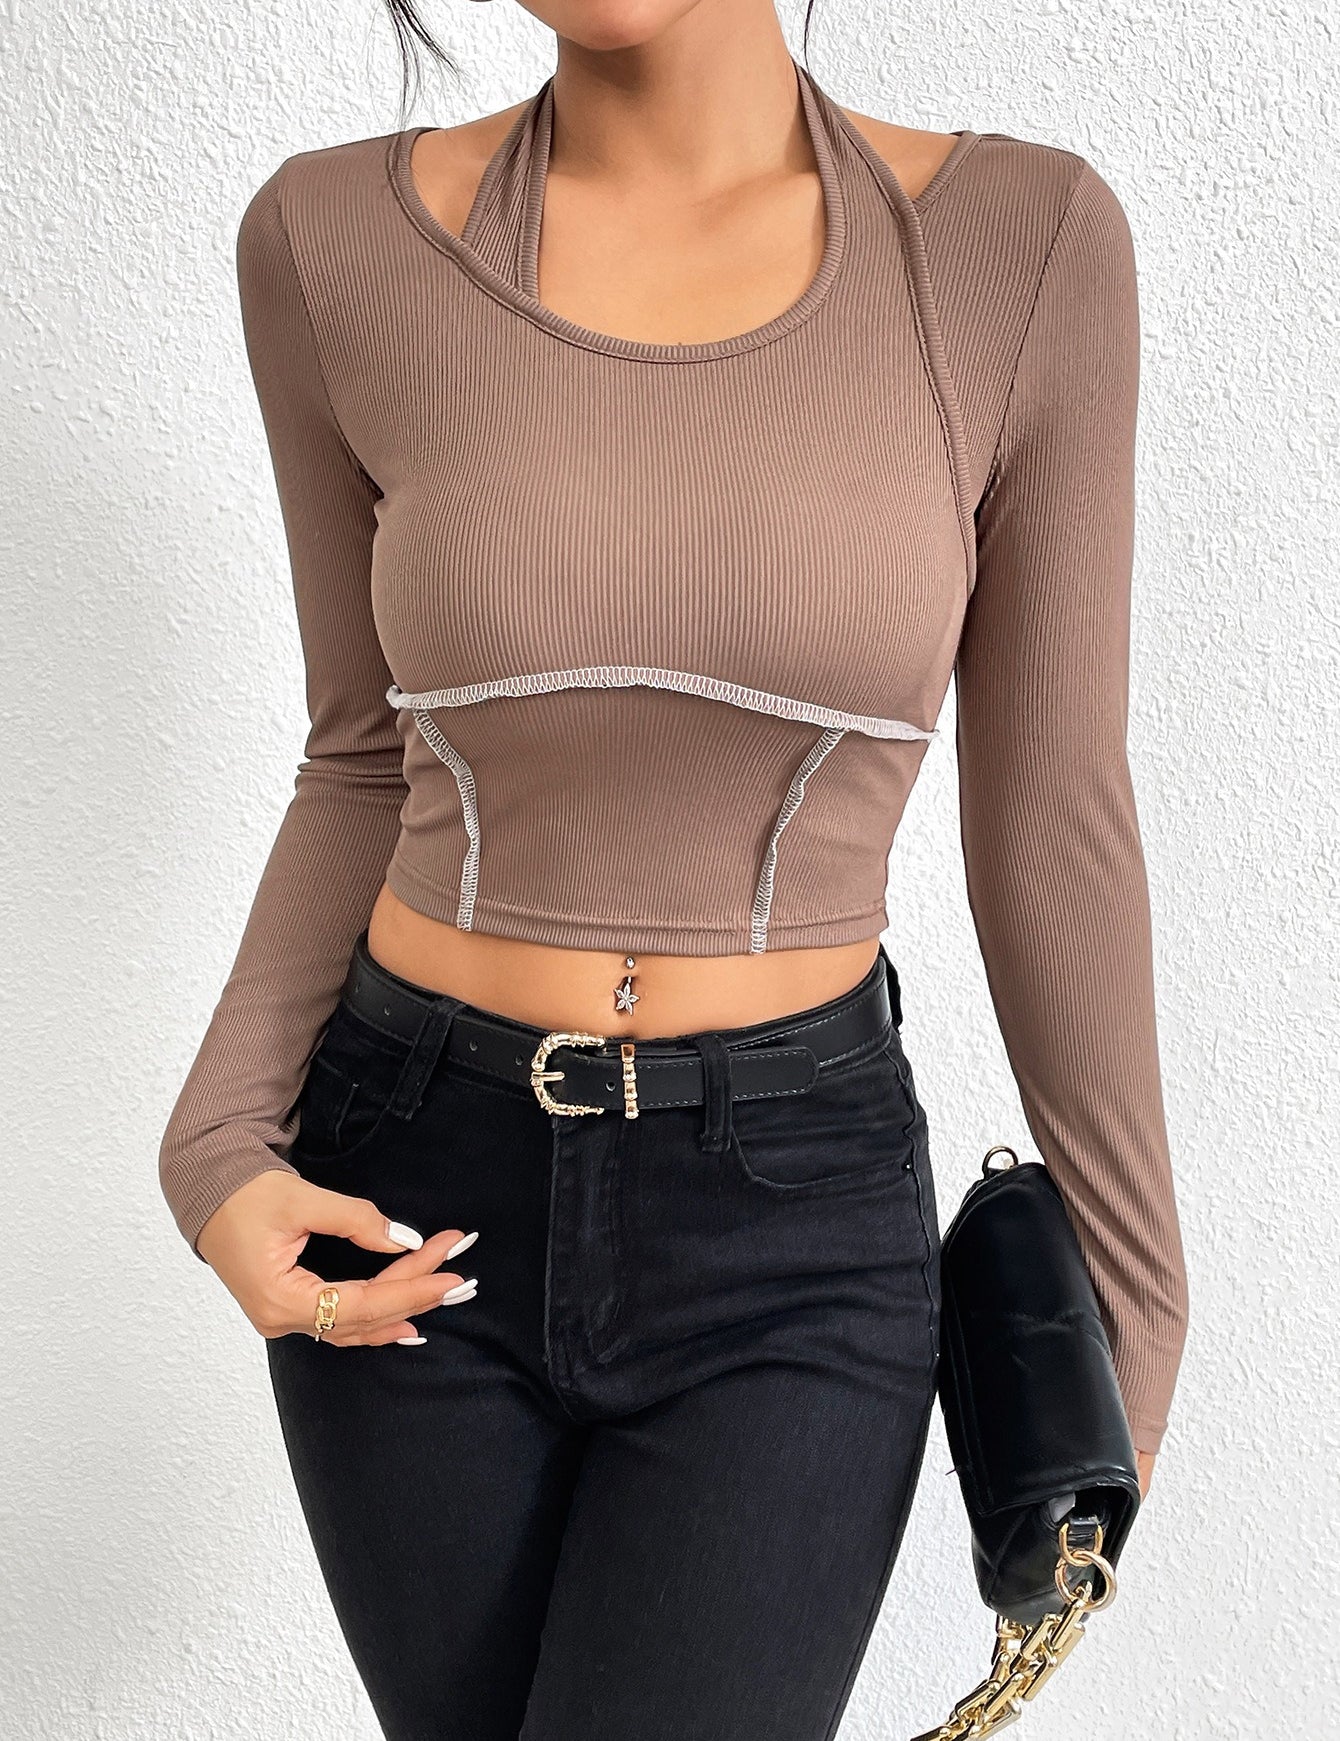 Slim fit knitted long sleeved sewing thread exposed hanging neck T-shirt fashion top - plusminusco.com